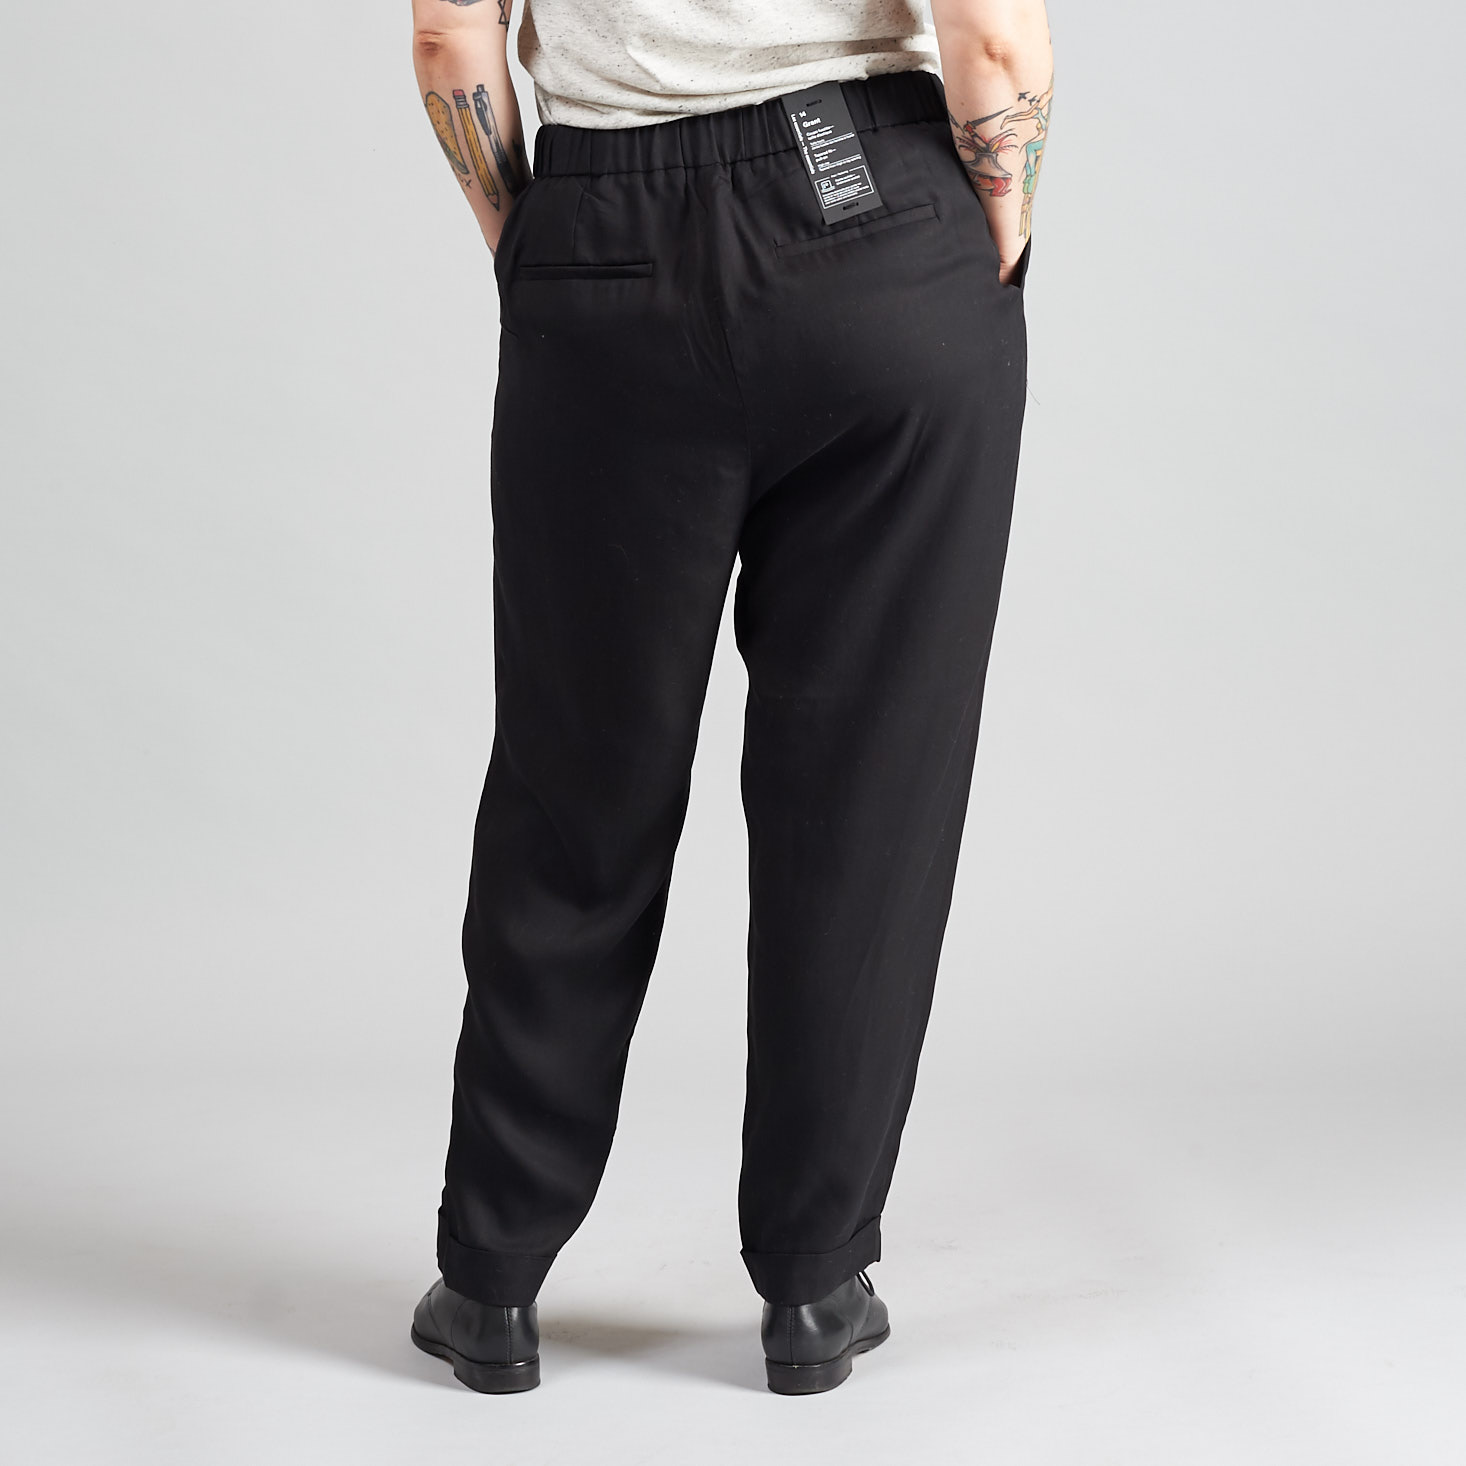 Marne wearing The Grant Pull-On Tapered Pant in Black - back